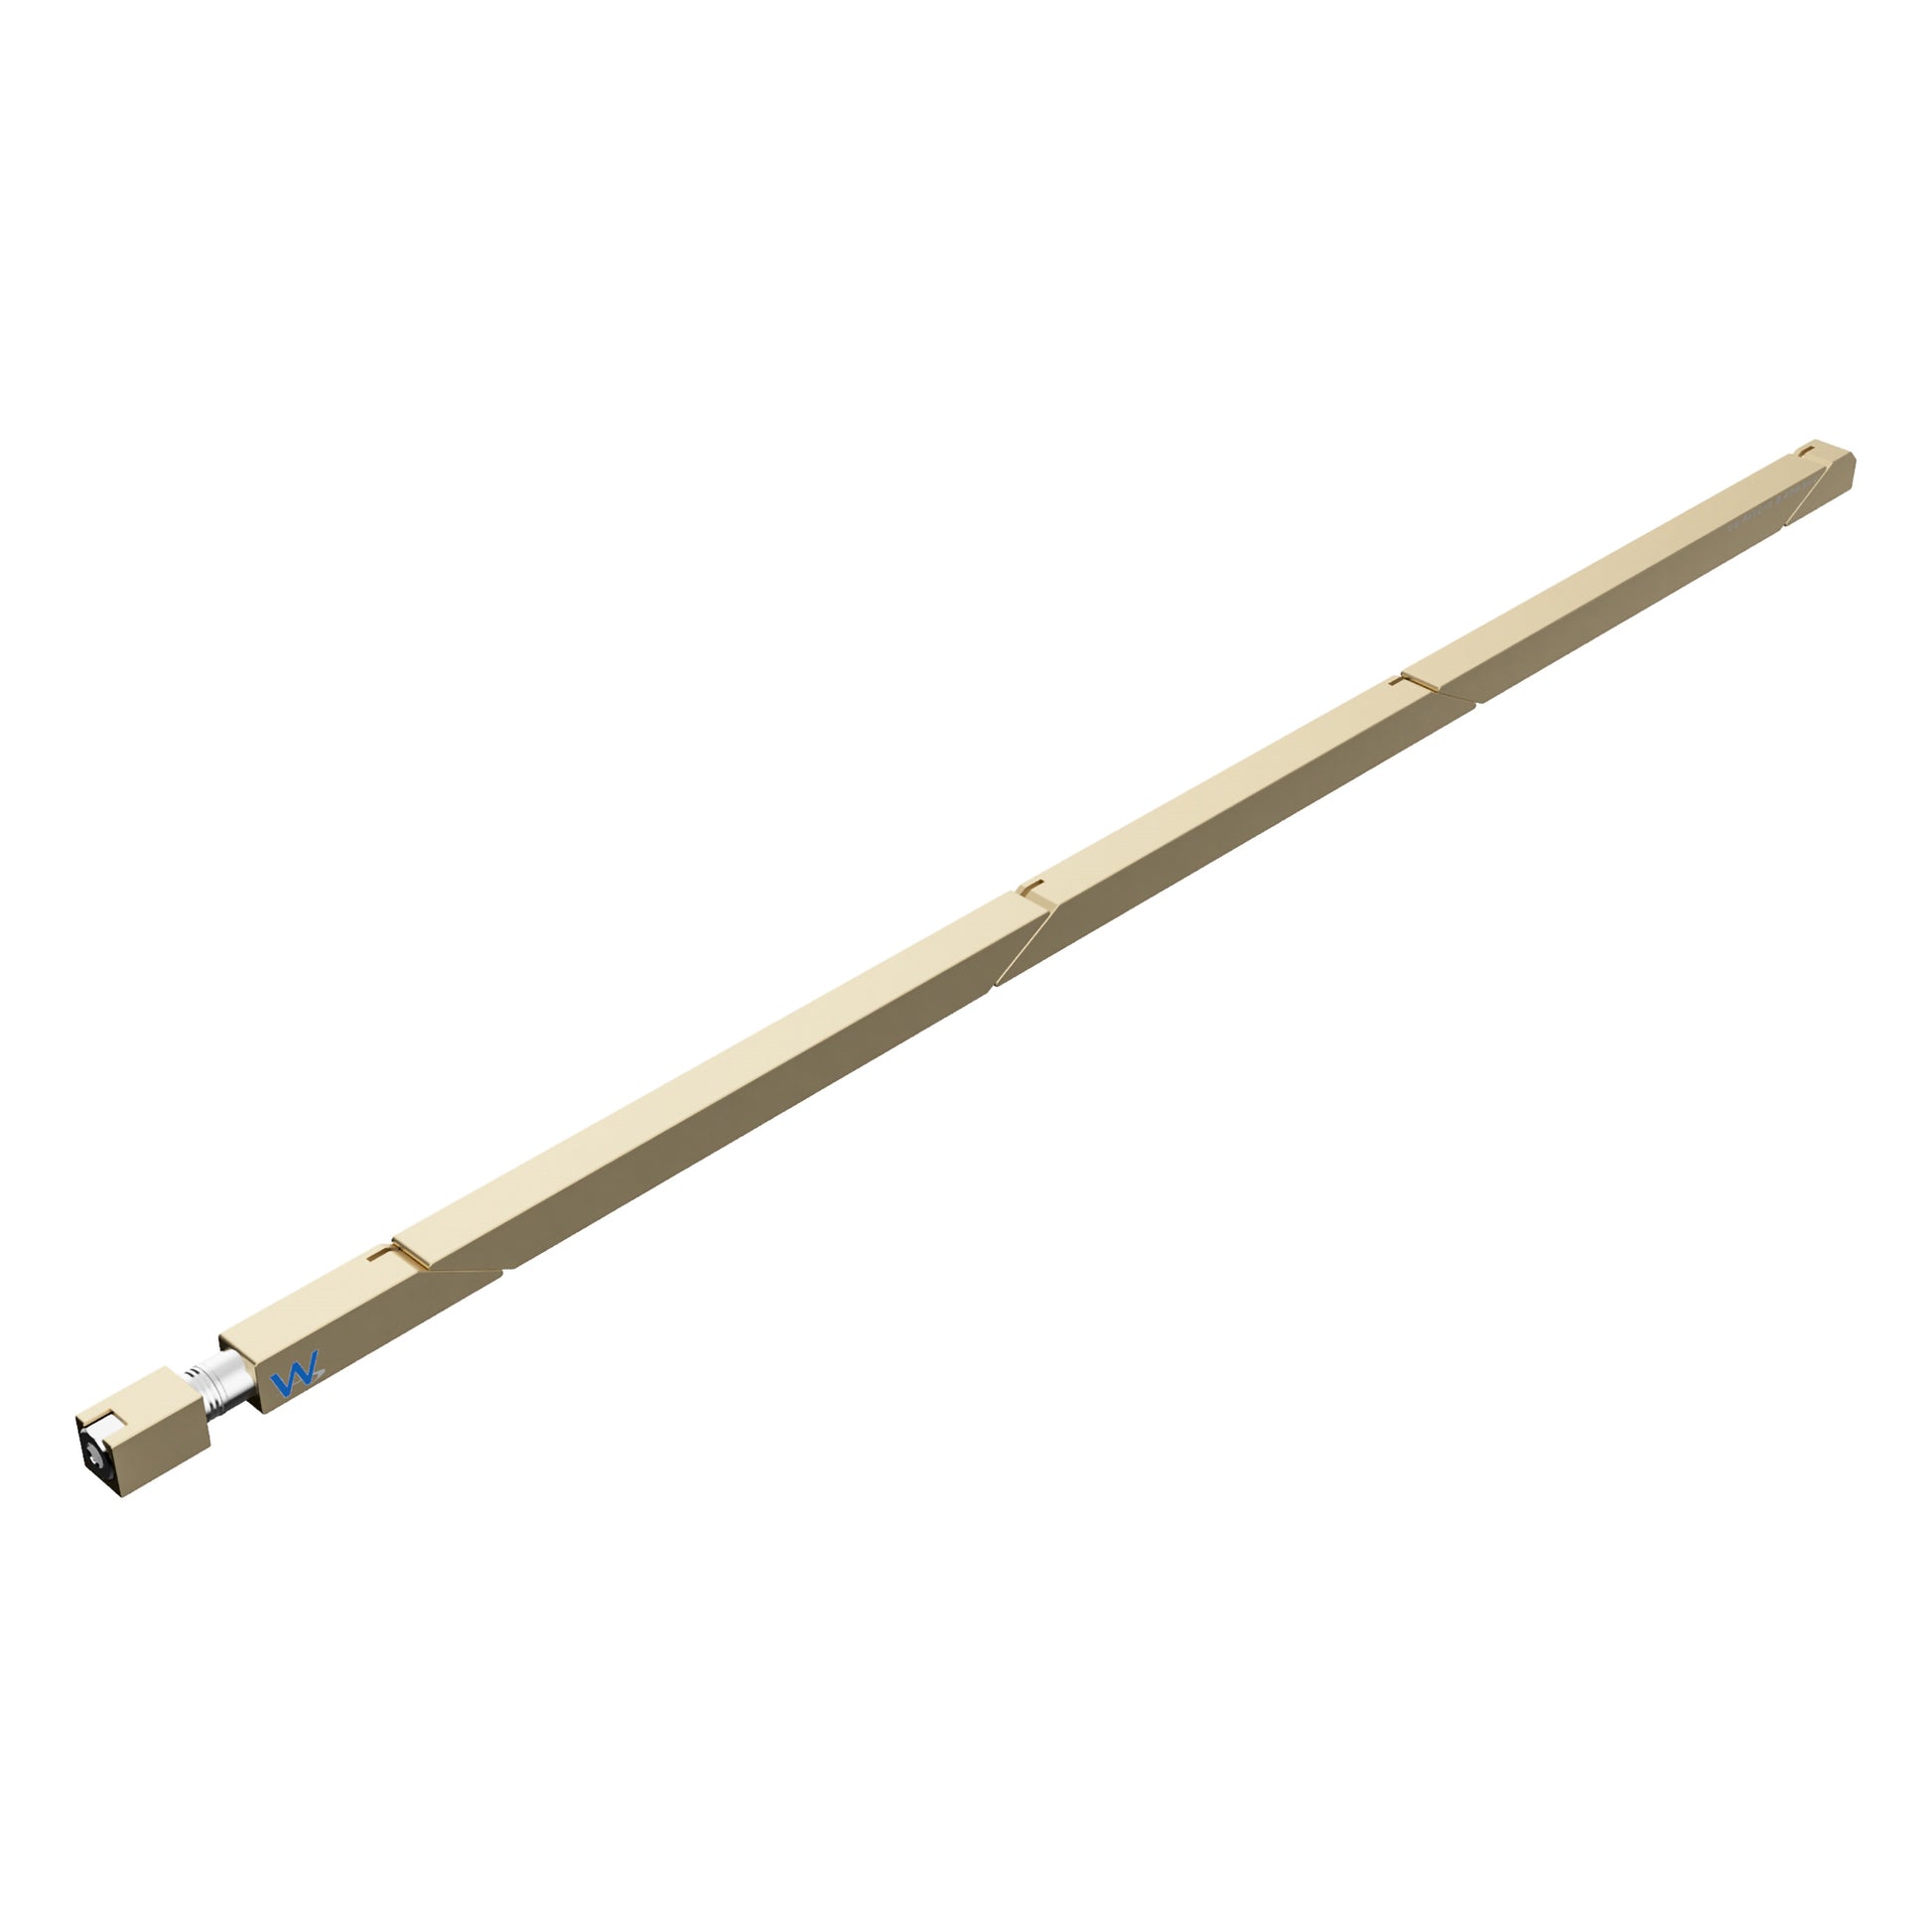 SW5-115-270-250 Max Force Belleville Wedgelock, segmented long rectulangular hardware component, Gold Chemical Film Finish